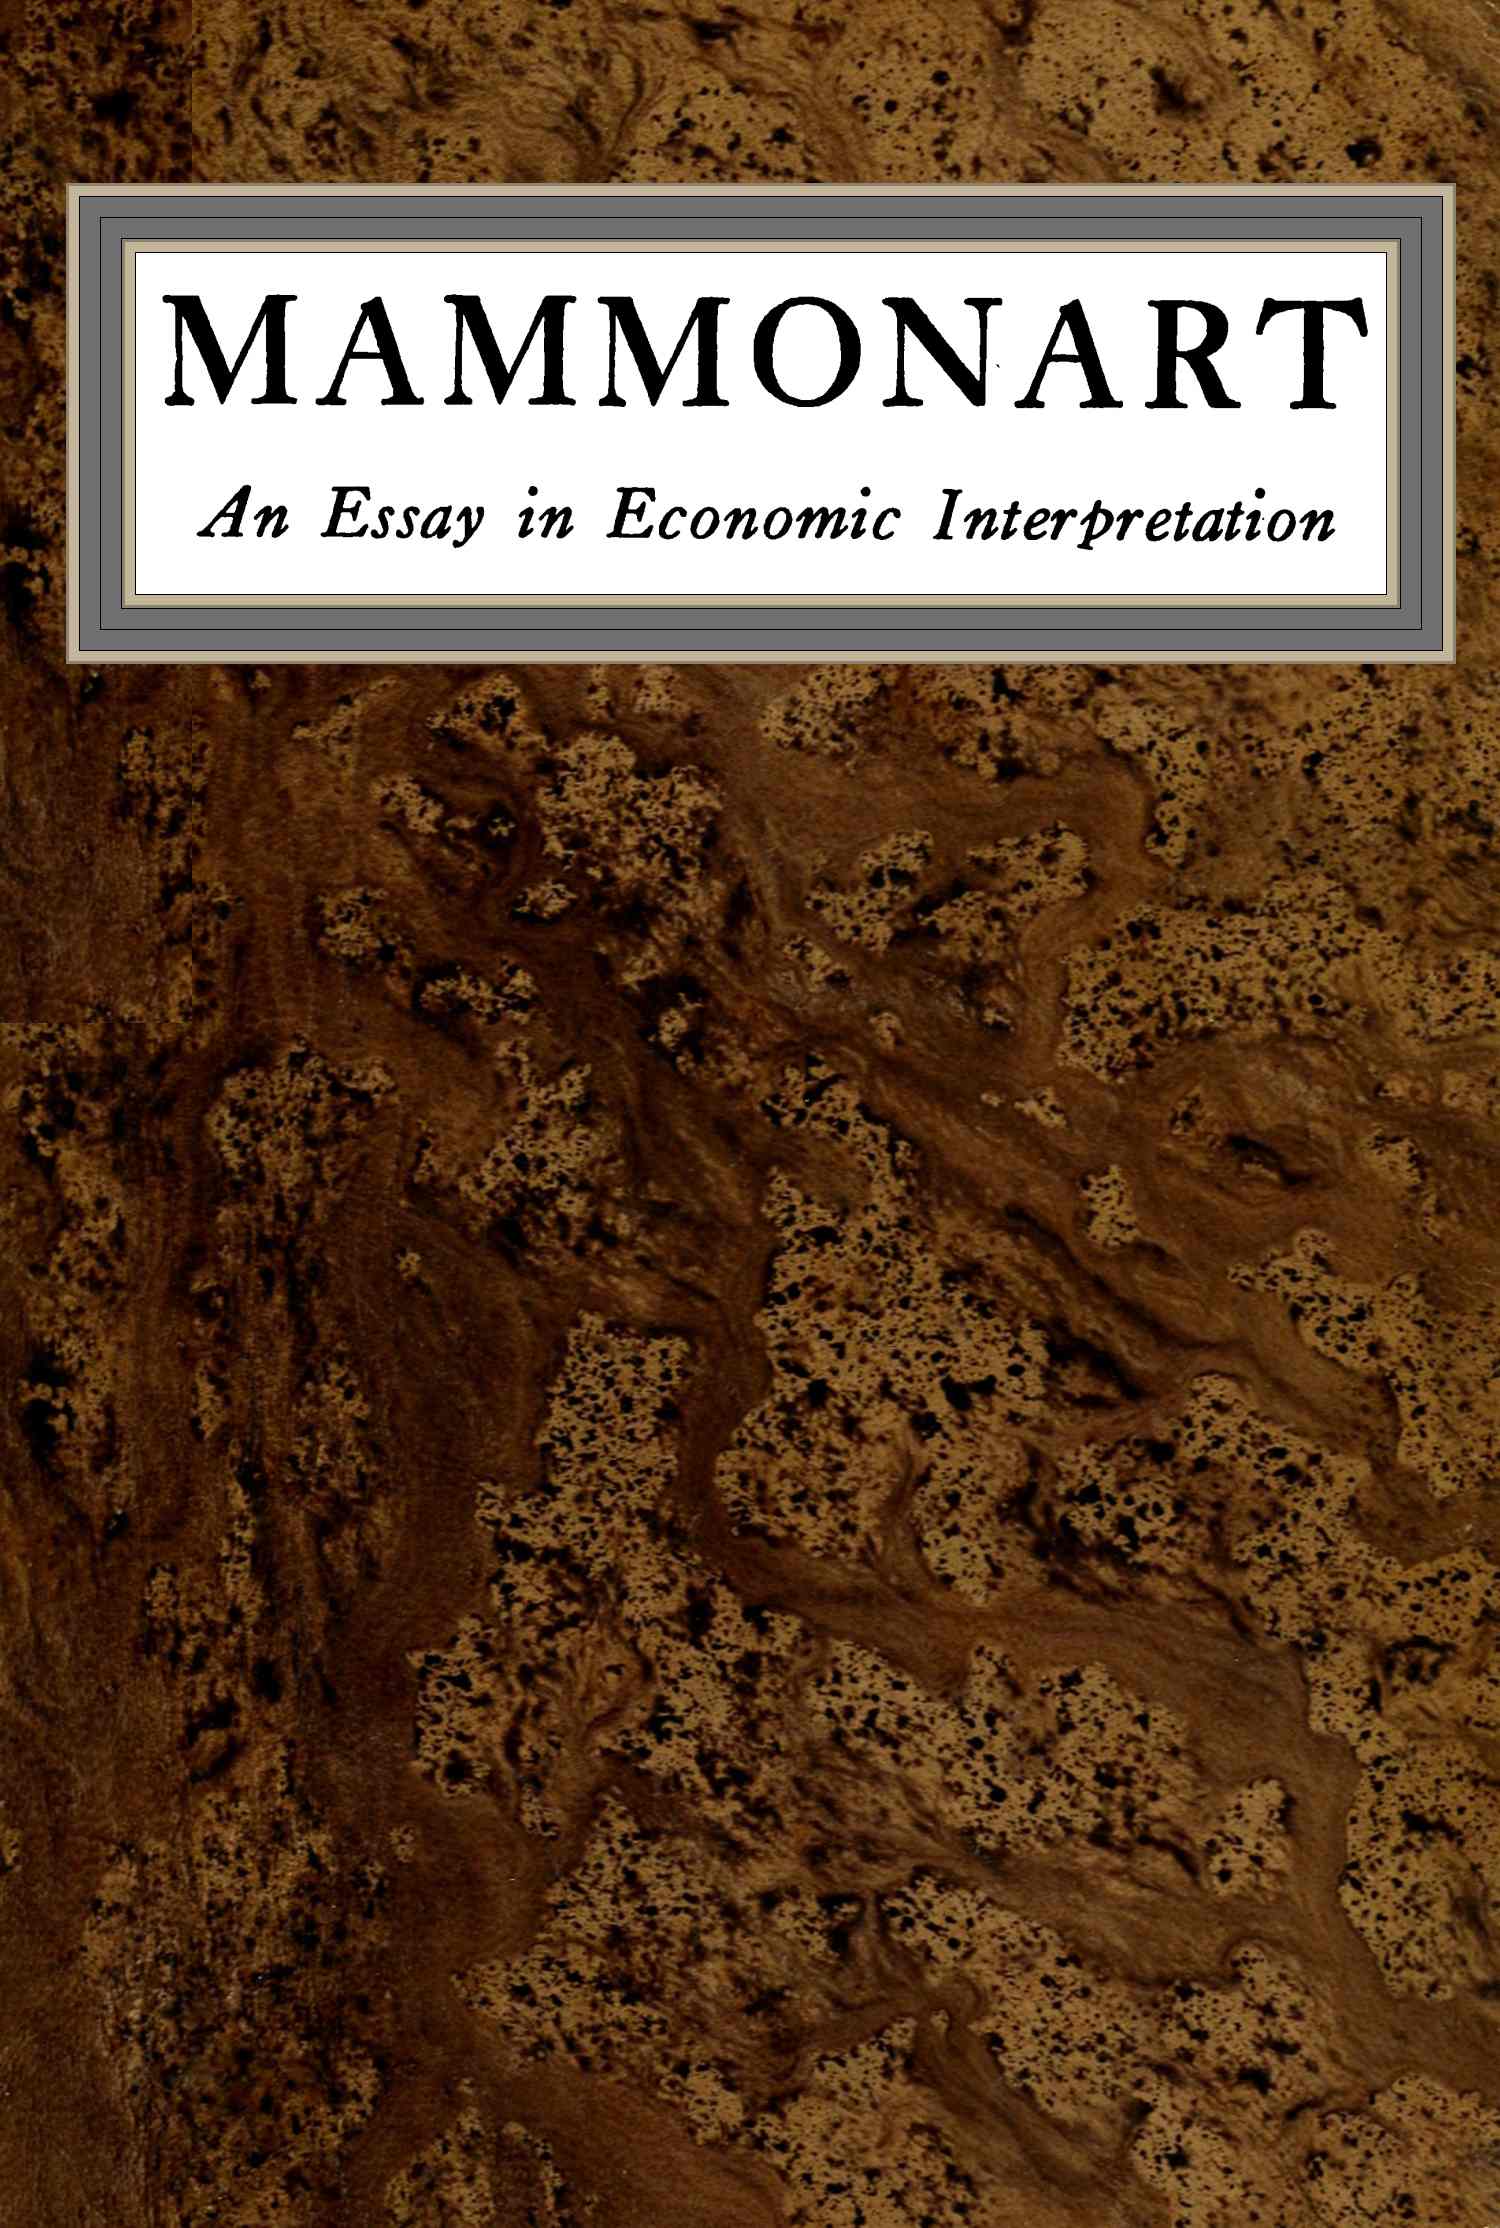 The Project Gutenberg eBook of Mammonart, by Upton Sinclair. image